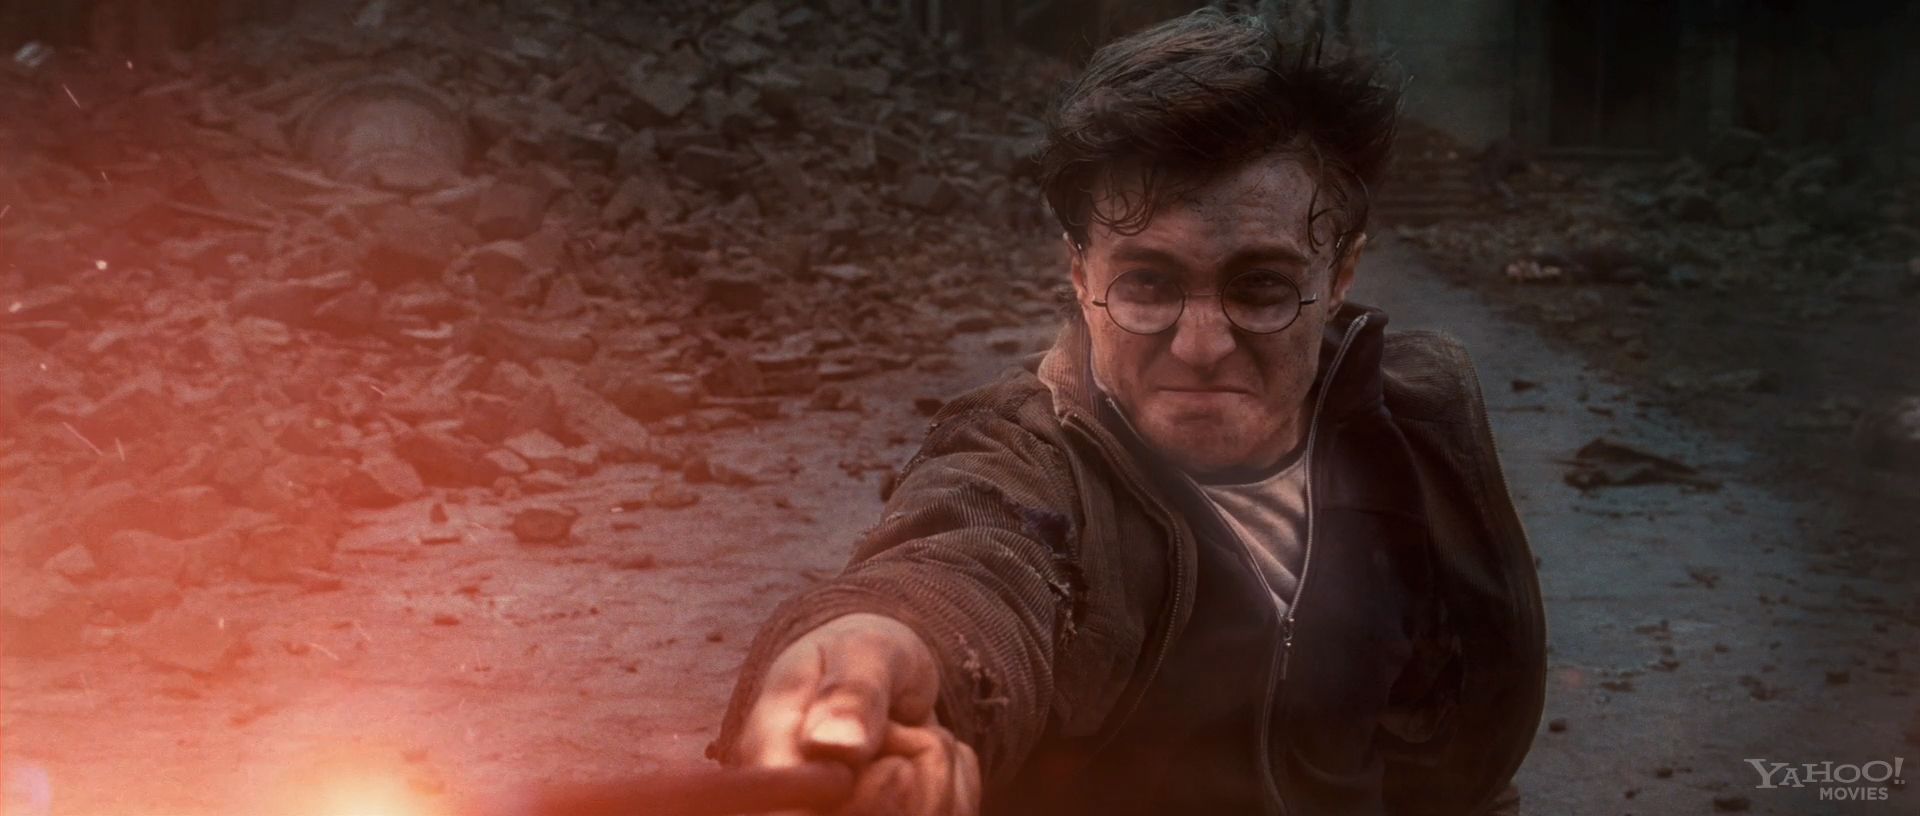 Harry Potter and the Deathly Hallow Trailer Still #3